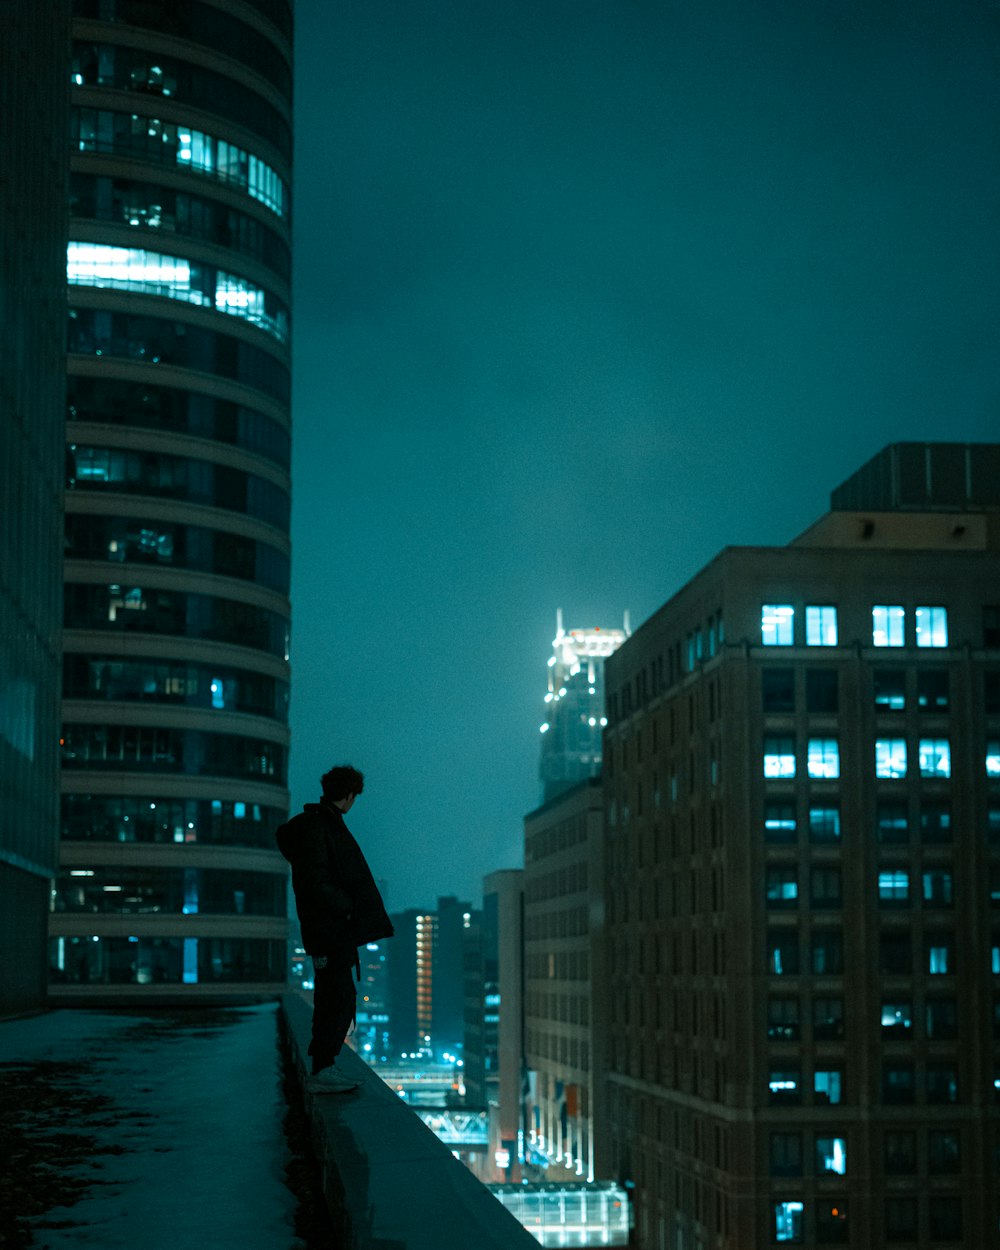 man standing on rooftop viewing city with high-rise buildings during night time